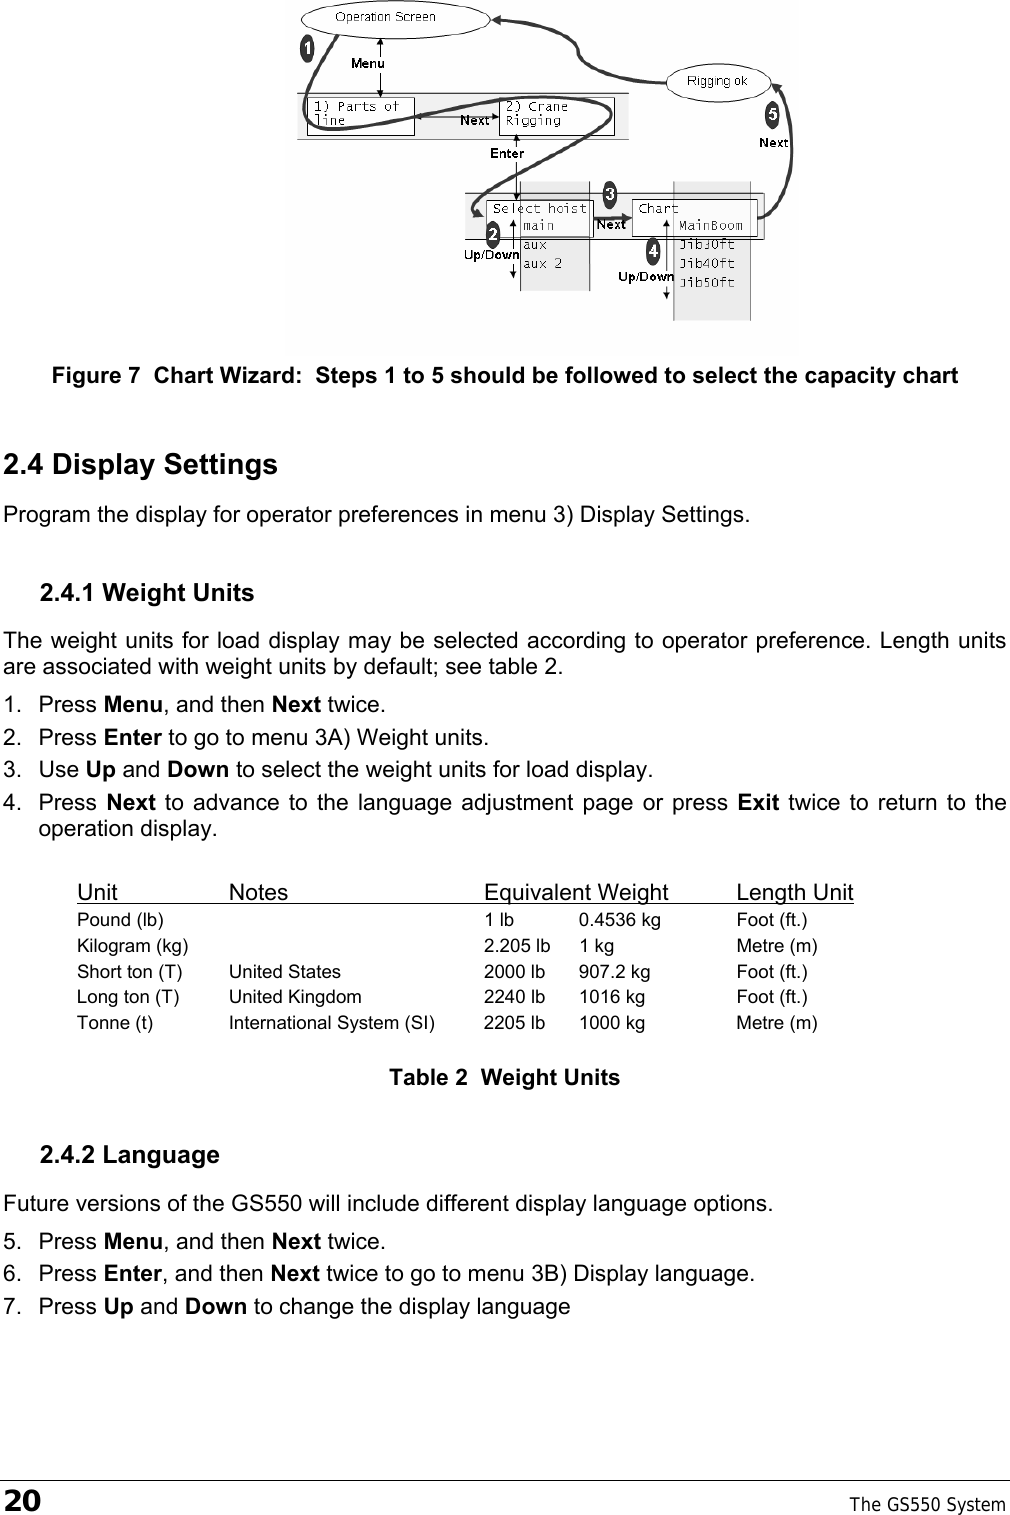 20    The GS550 System   Figure 7  Chart Wizard:  Steps 1 to 5 should be followed to select the capacity chart 2.4 Display Settings Program the display for operator preferences in menu 3) Display Settings. 2.4.1 Weight Units The weight units for load display may be selected according to operator preference. Length units are associated with weight units by default; see table 2.  1. Press Menu, and then Next twice. 2. Press Enter to go to menu 3A) Weight units. 3. Use Up and Down to select the weight units for load display. 4. Press Next to advance to the language adjustment page or press Exit twice to return to the operation display.  Unit  Notes  Equivalent Weight  Length Unit Pound  (lb)    1 lb  0.4536 kg  Foot (ft.) Kilogram (kg)    2.205 lb  1 kg  Metre (m) Short ton (T)  United States  2000 lb  907.2 kg Foot (ft.) Long ton (T)  United Kingdom  2240 lb  1016 kg Foot (ft.) Tonne (t)  International System (SI)  2205 lb  1000 kg  Metre (m)  Table 2  Weight Units 2.4.2 Language Future versions of the GS550 will include different display language options.  5. Press Menu, and then Next twice. 6. Press Enter, and then Next twice to go to menu 3B) Display language. 7. Press Up and Down to change the display language 